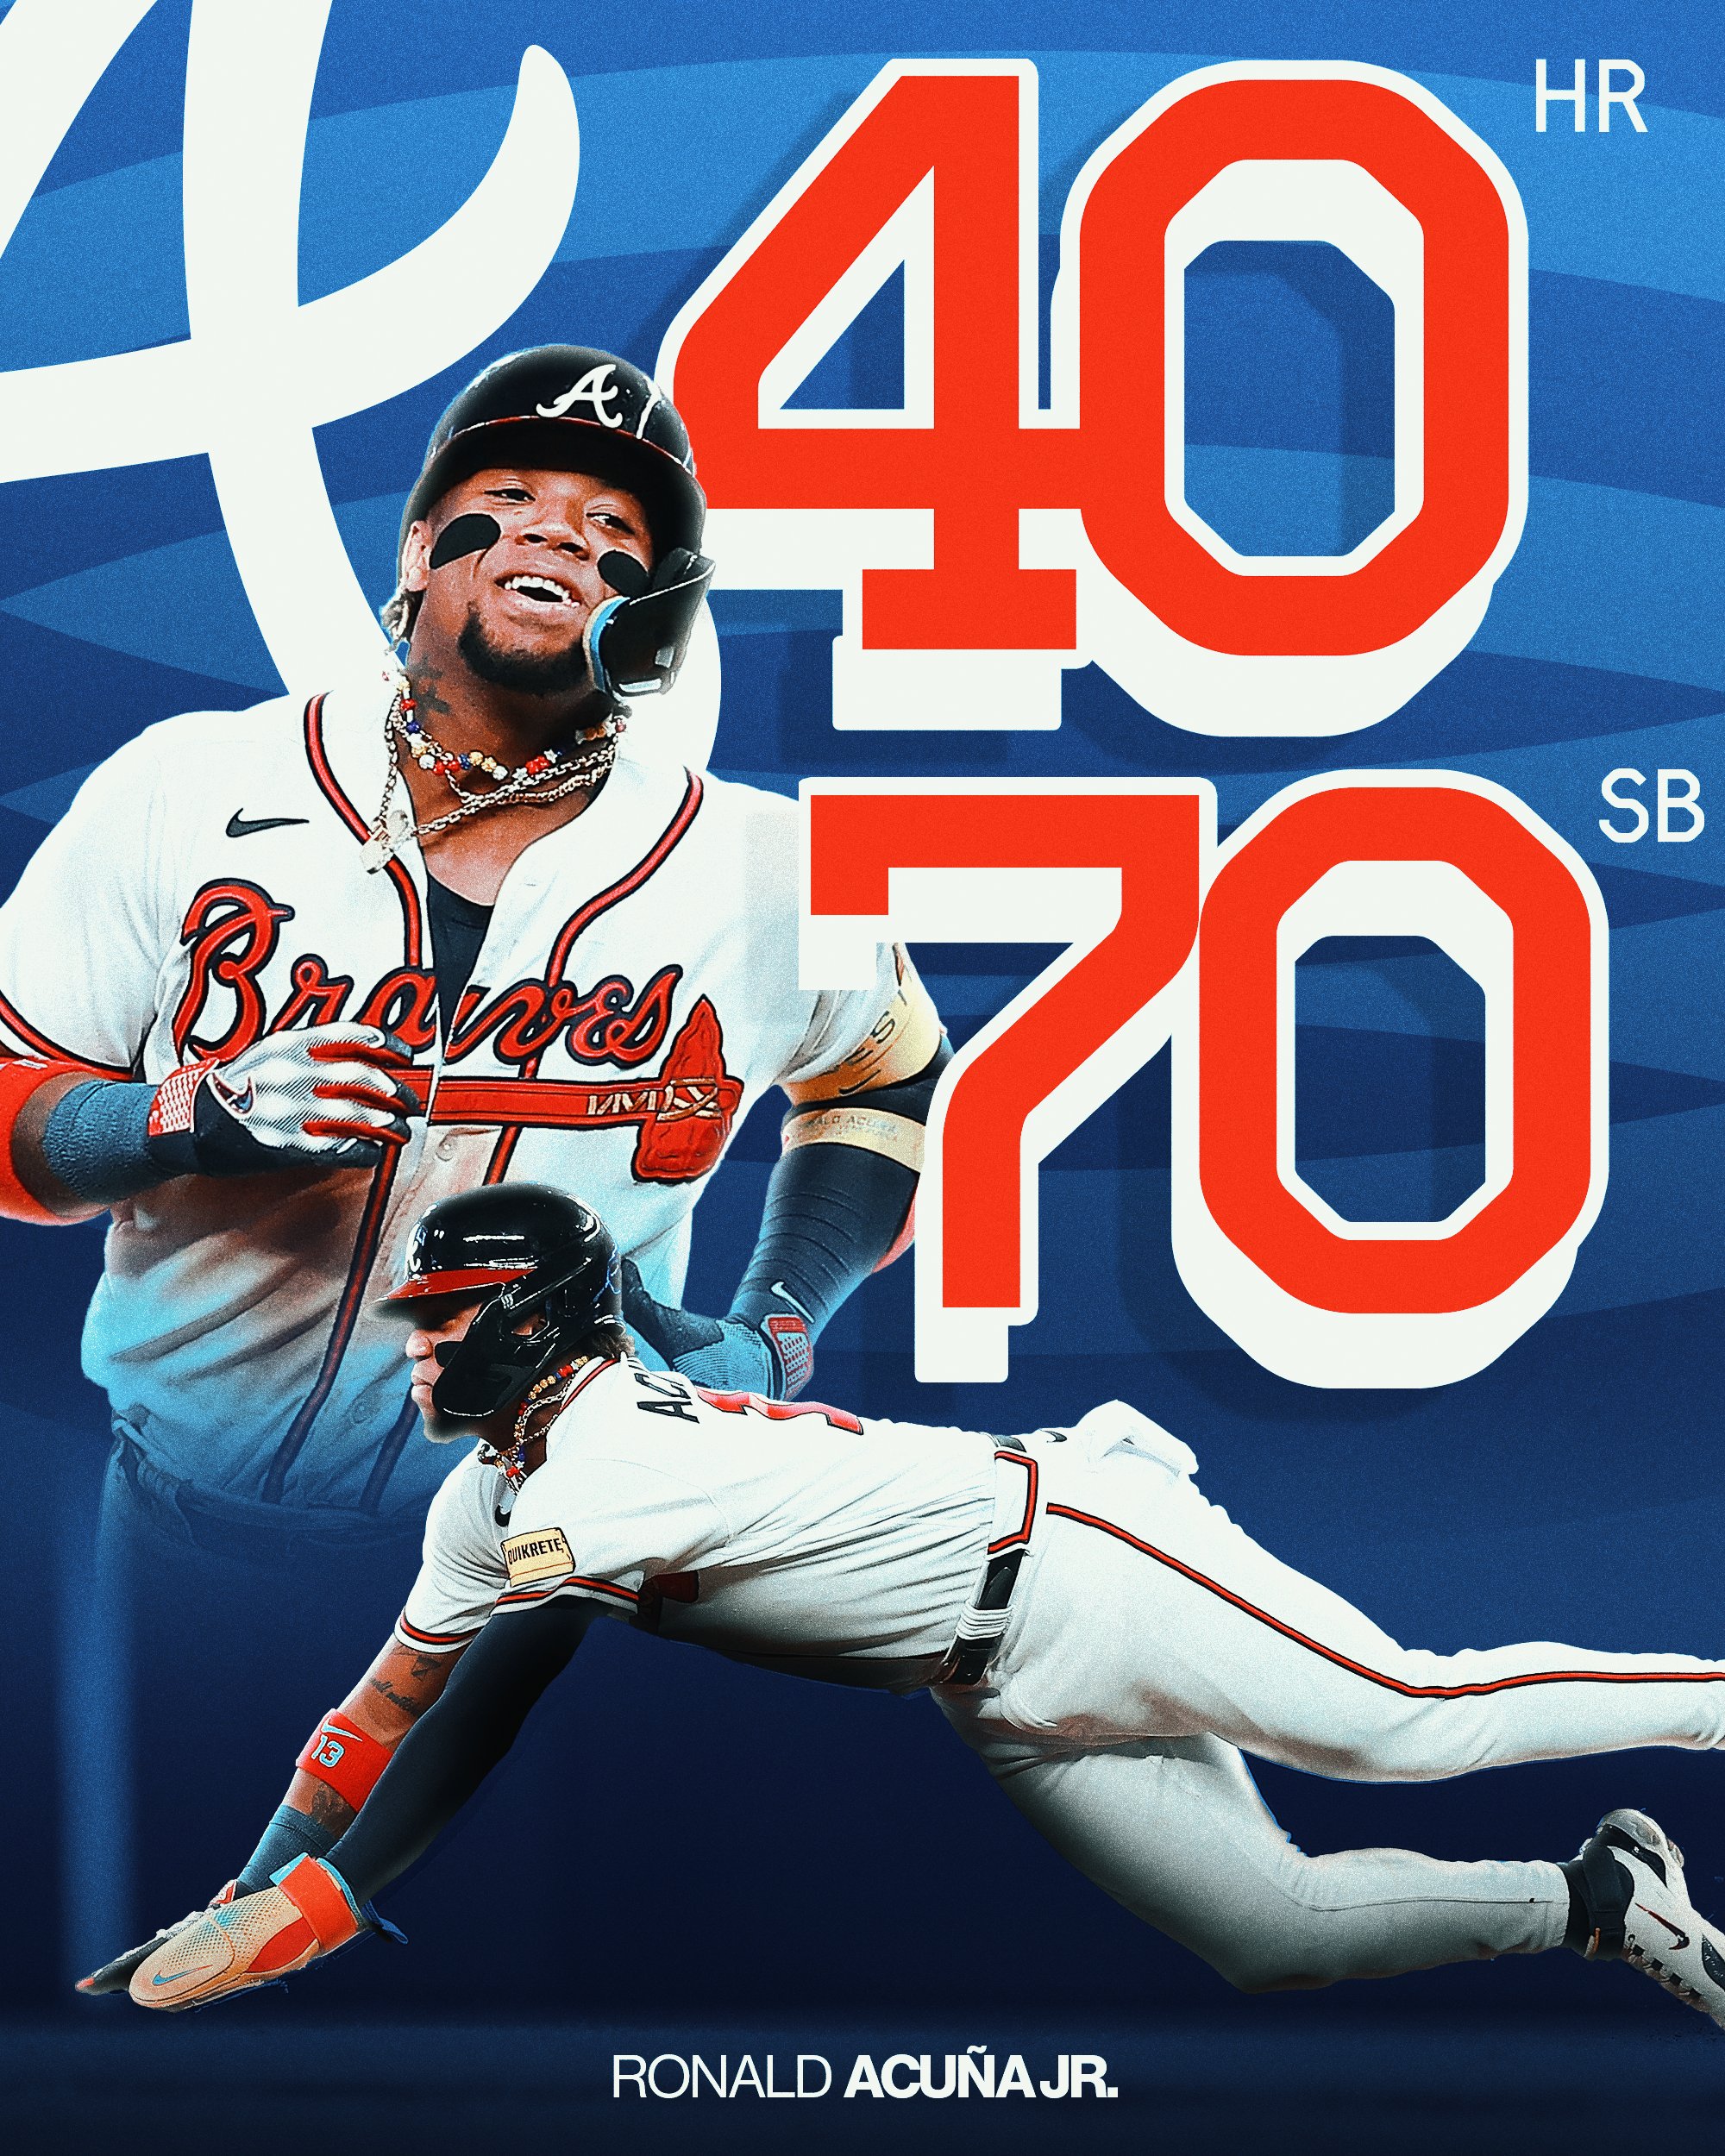 MLB on X: Members of the 40/70 club: Ronald Acuña Jr. That's it